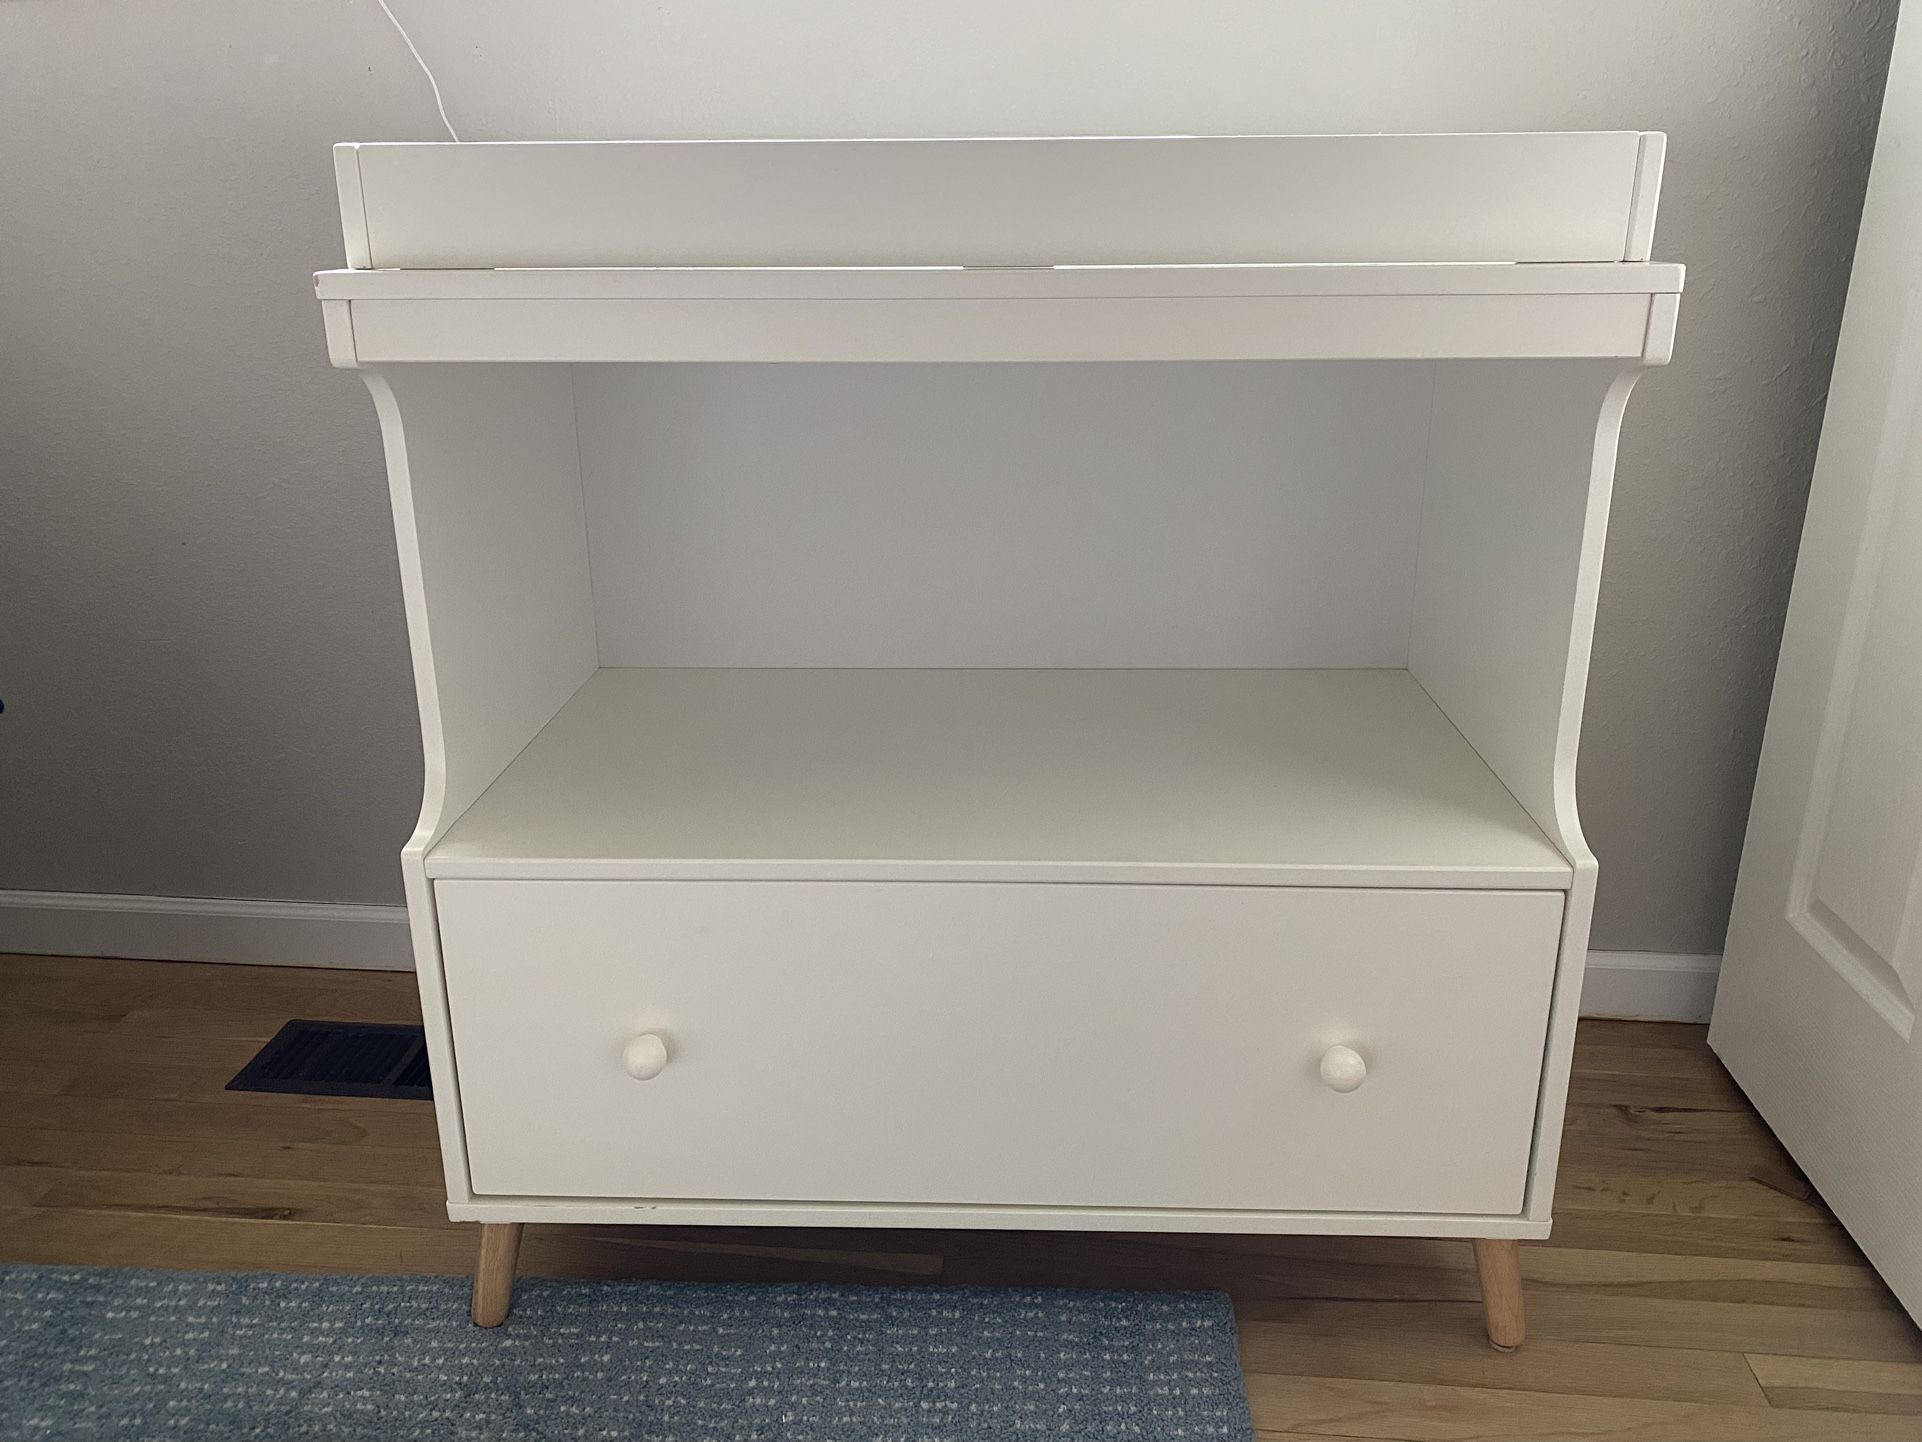 Essex Convertible Changing Table with Drawer